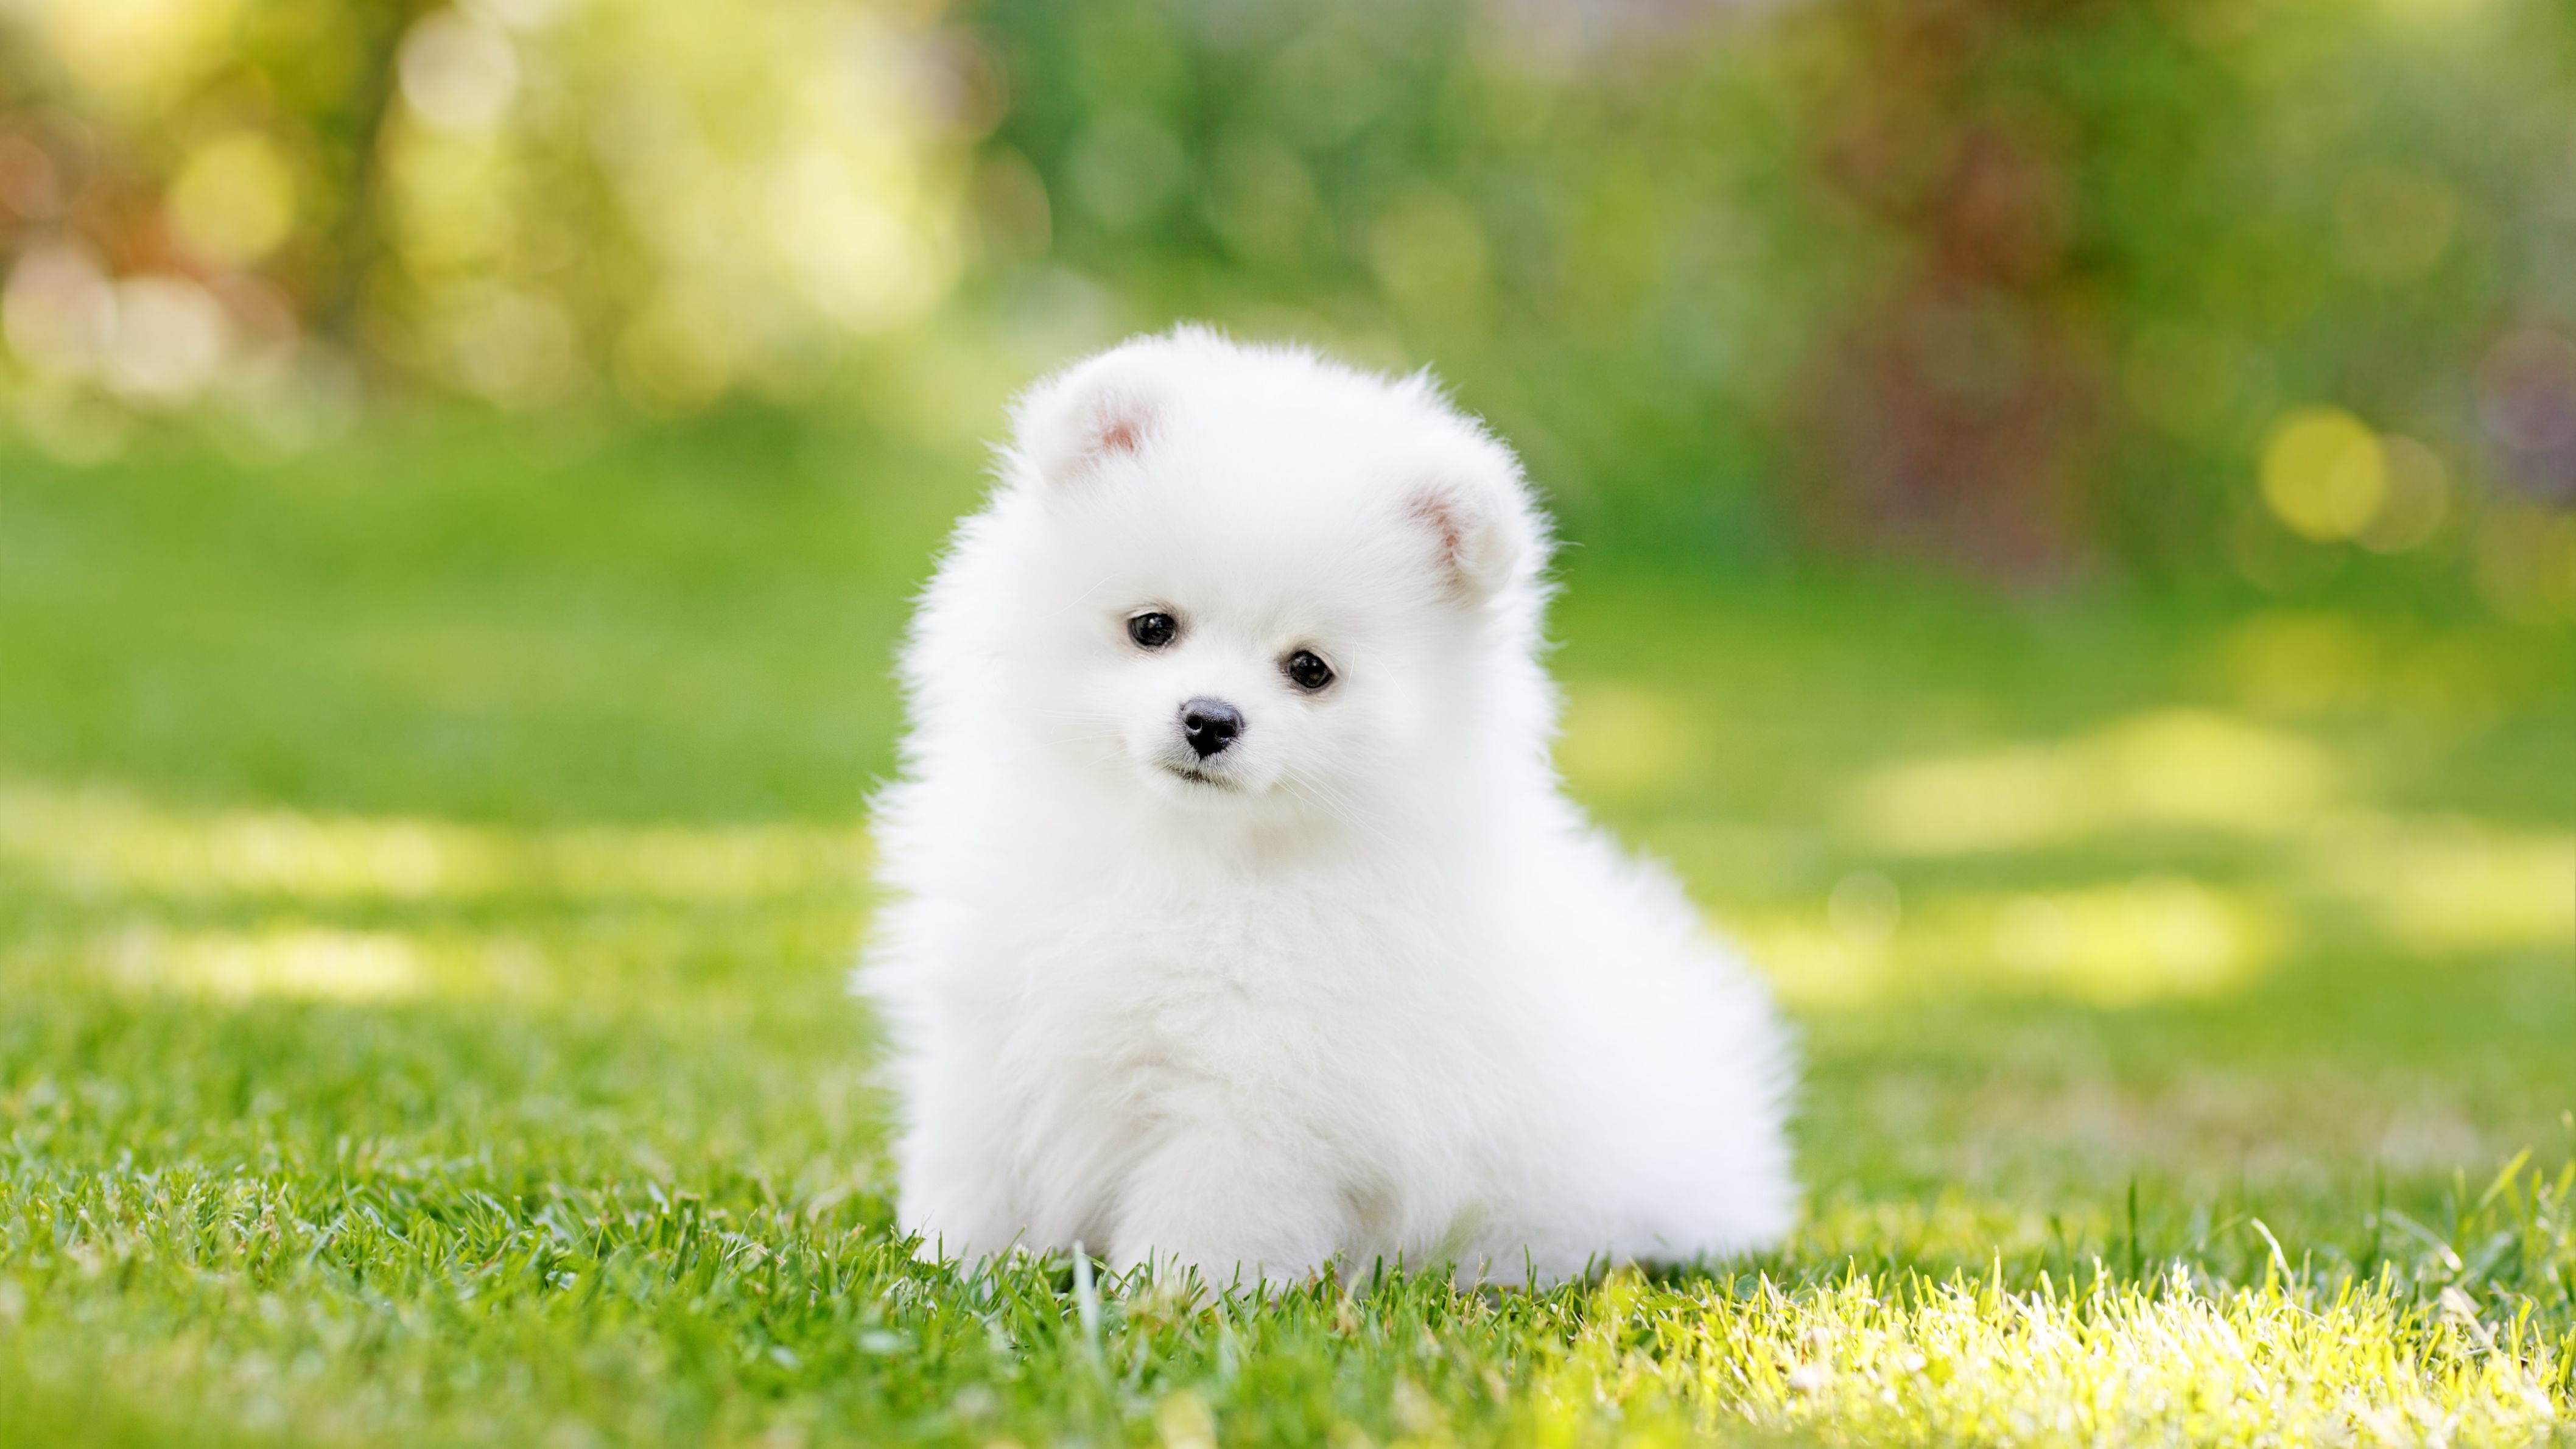 Teacup Dogs Wallpapers - Wallpaper Cave